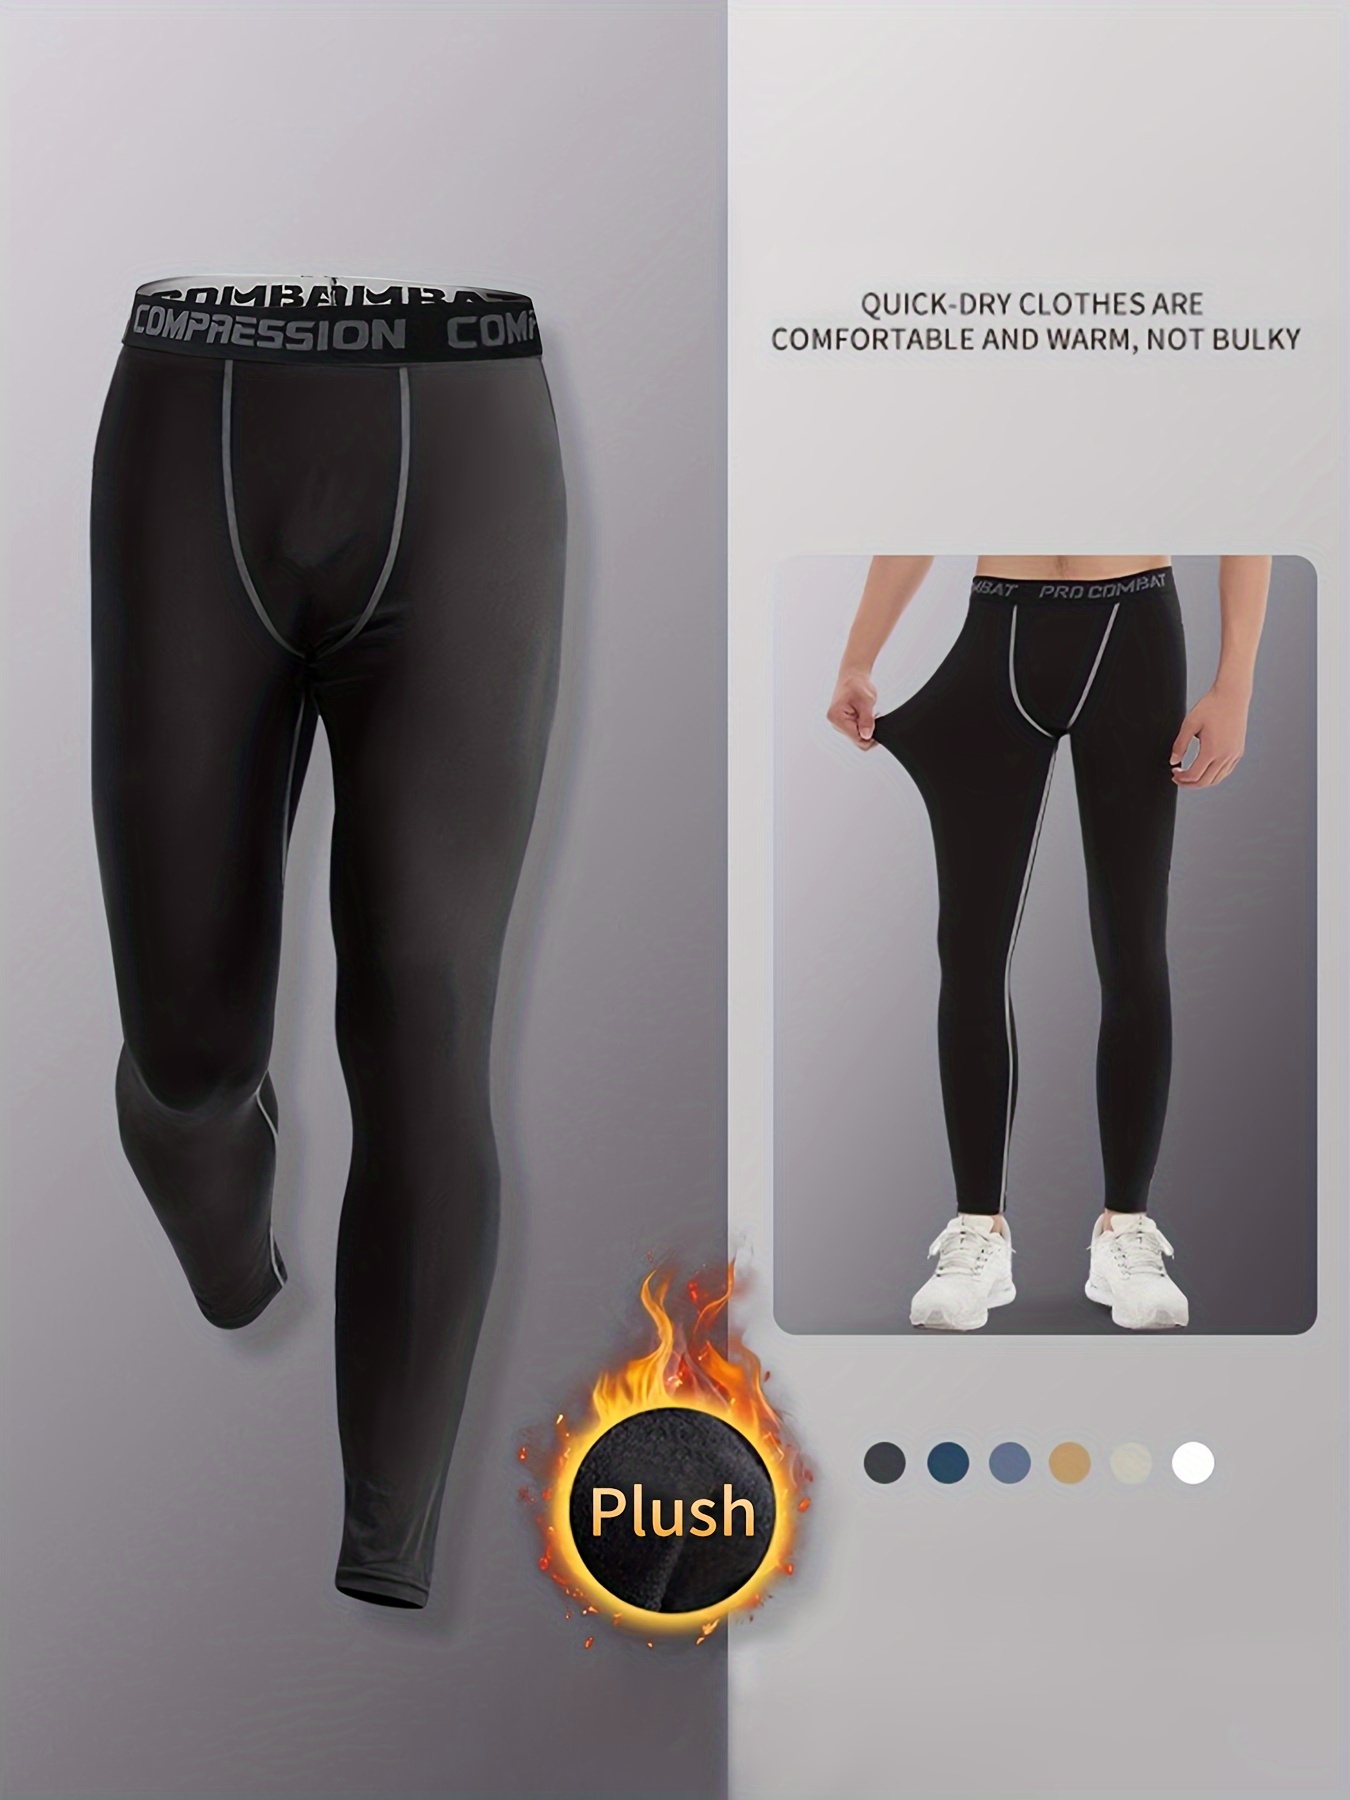 Compression Pants Sports Shorts Men's Elastic Quick-drying Breathable Basketball  Leggings Running Track And Field Training Pants Fitness Shorts U5A3 